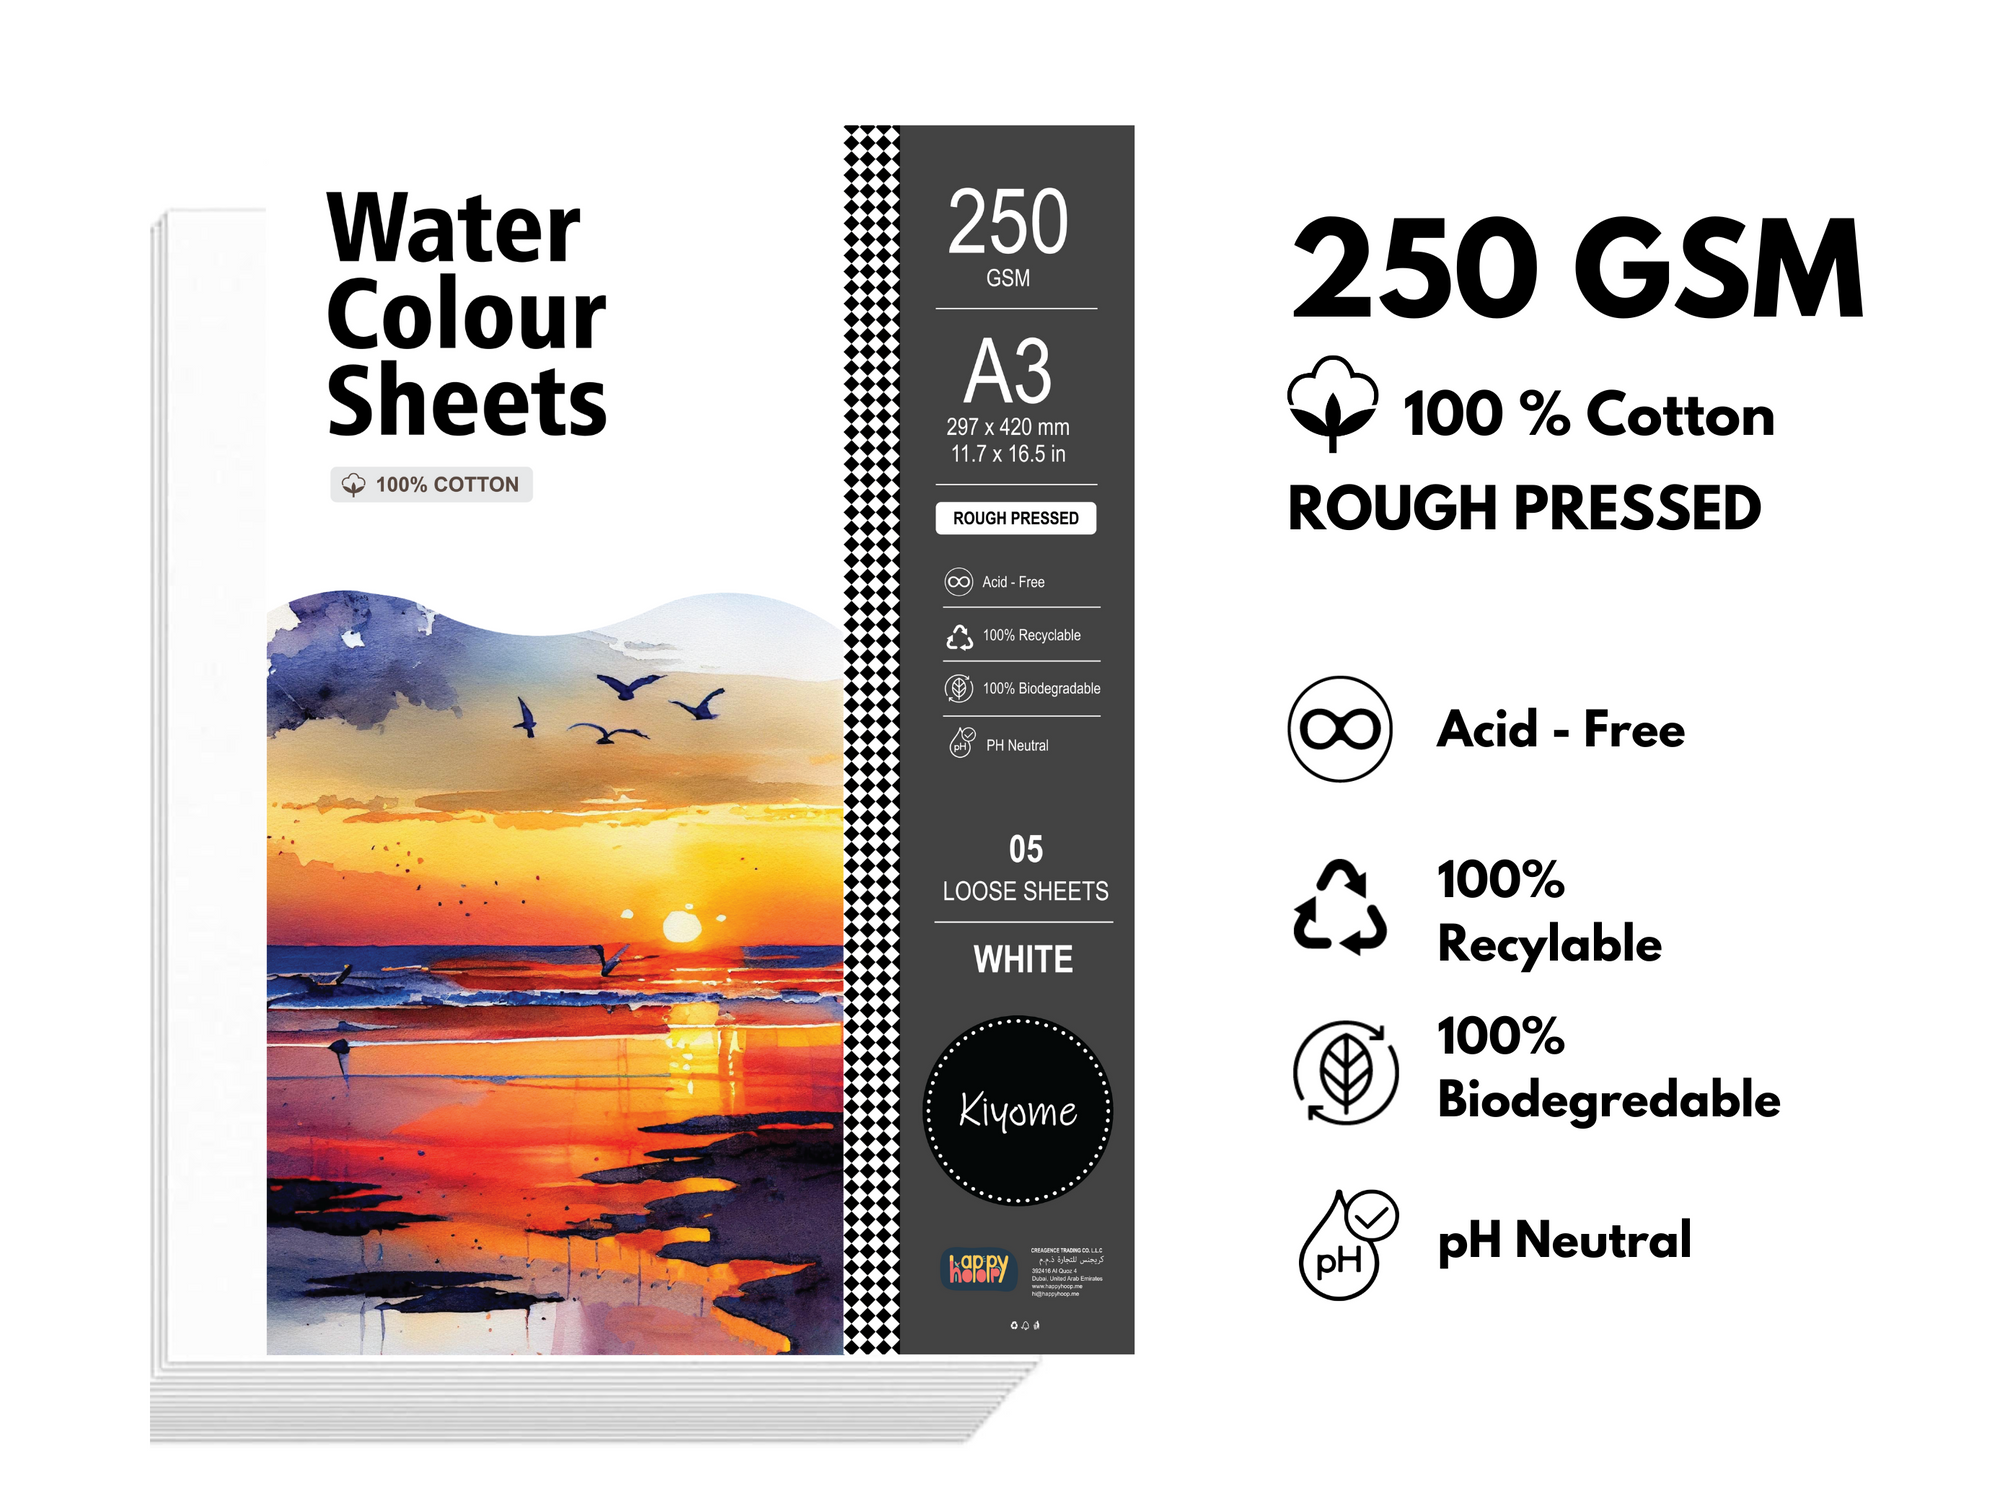 Kiyome 100% Cotton Watercolor Sheets | Rough Pressed | 250 GSM | A3 | 5 Sheets